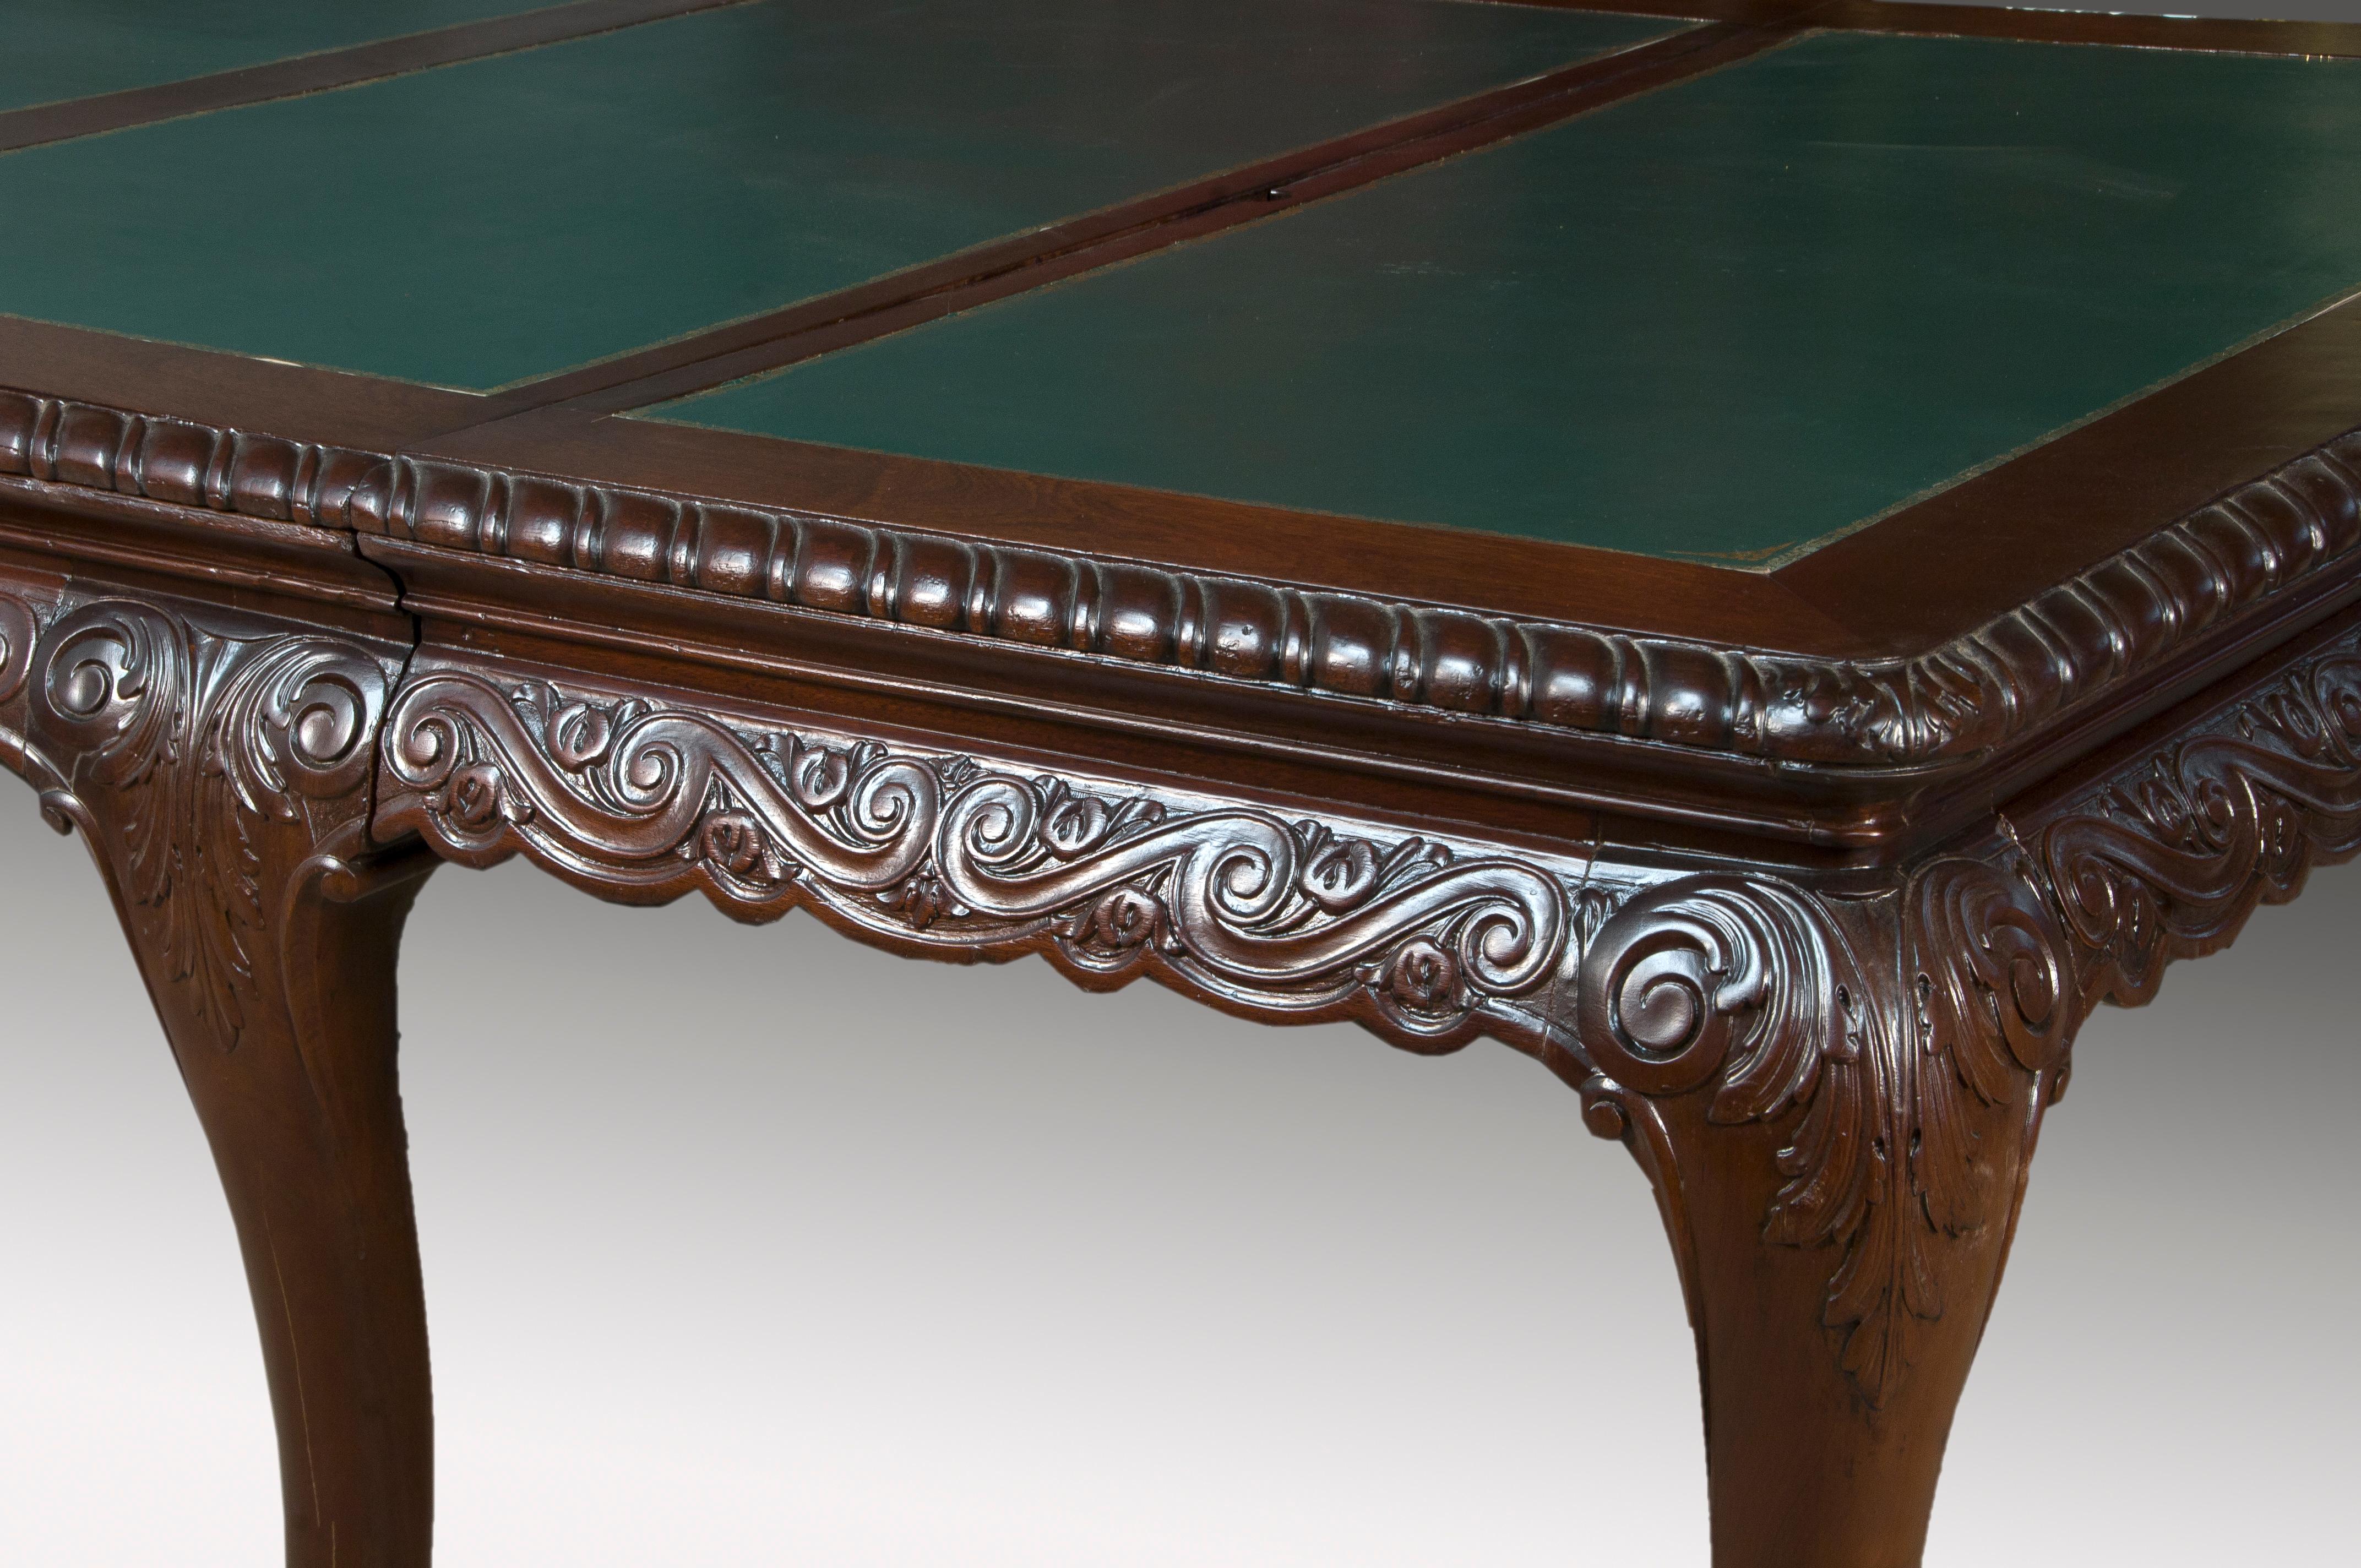 Rectangular mahogany table with eight legs ending in small metal wheels. It has a system of 